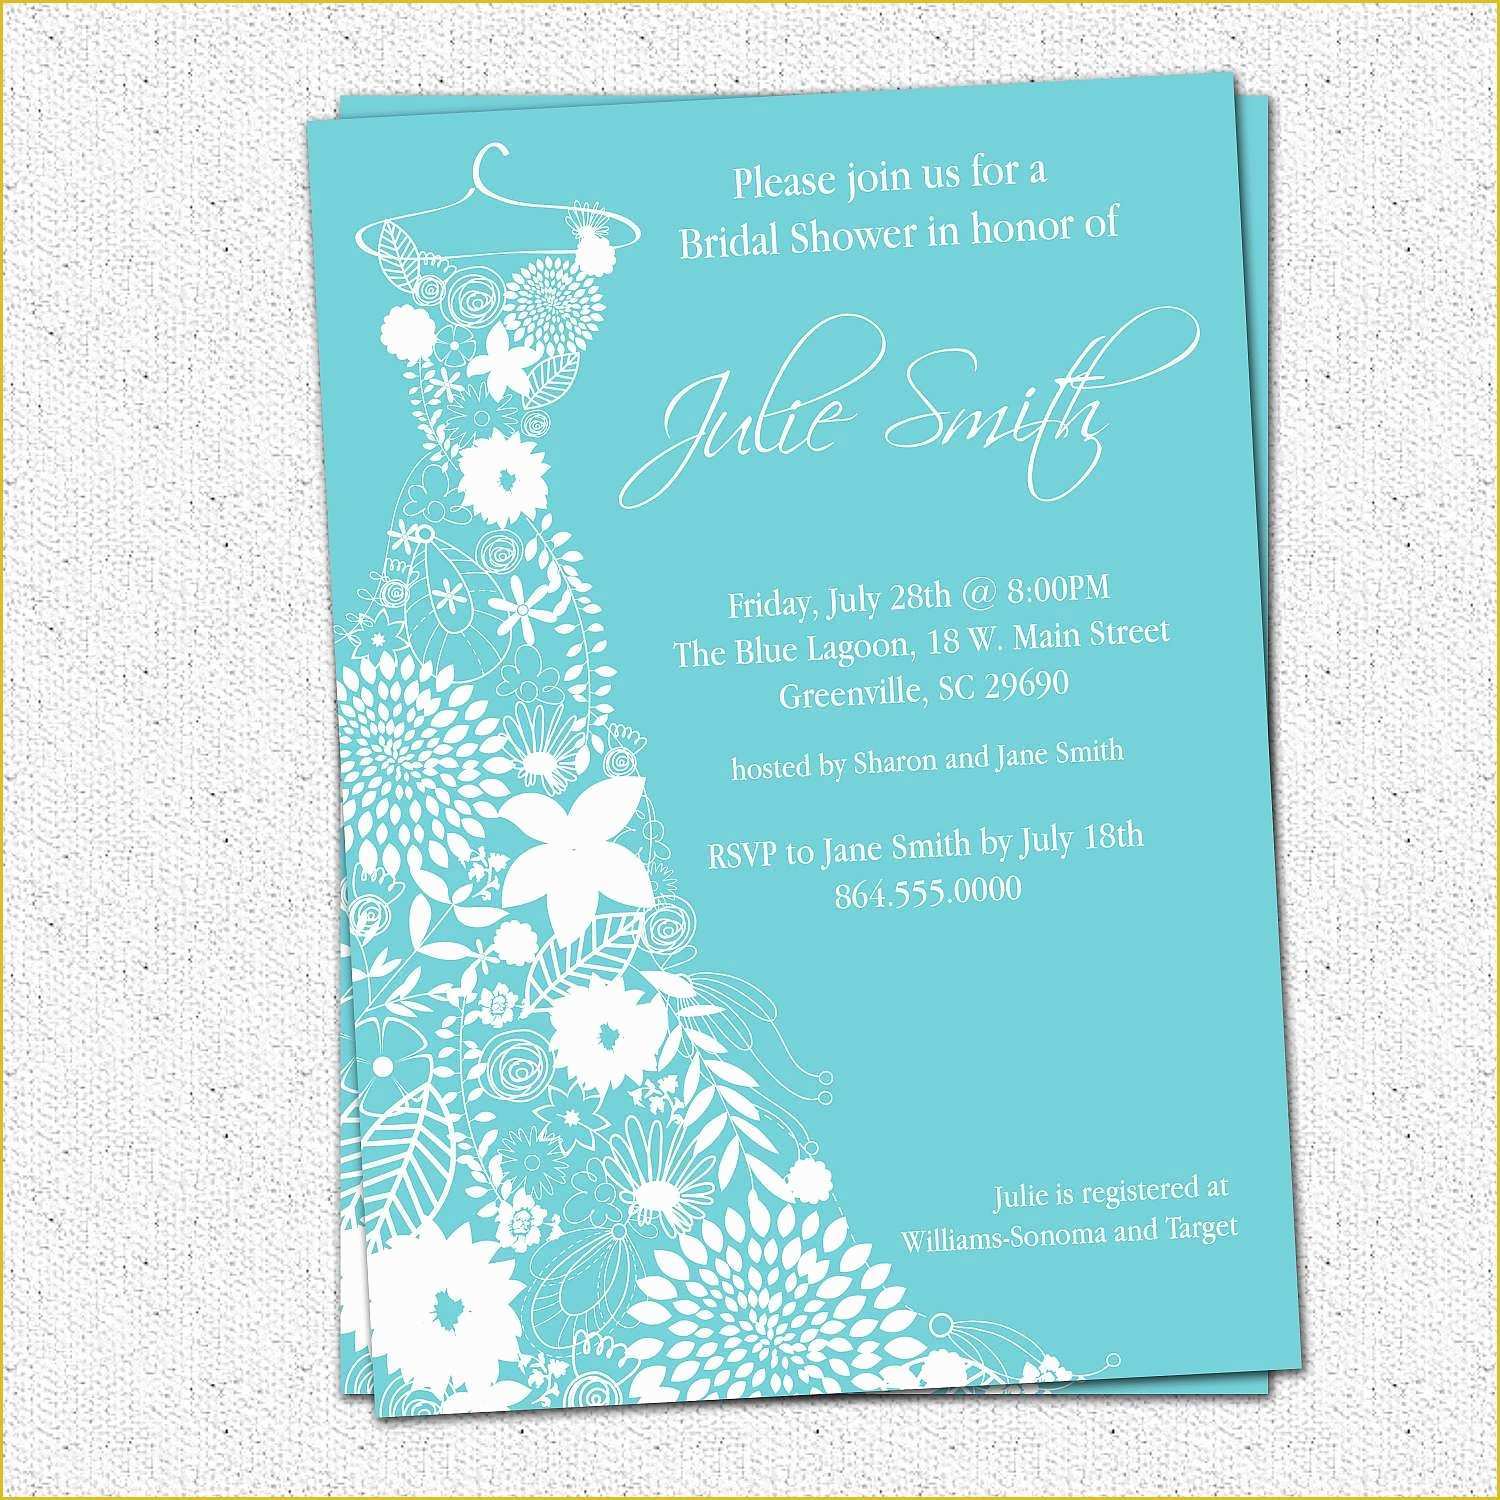 Free Invitation Templates for Word Of Bridal Shower Invitation Templates Microsoft Word